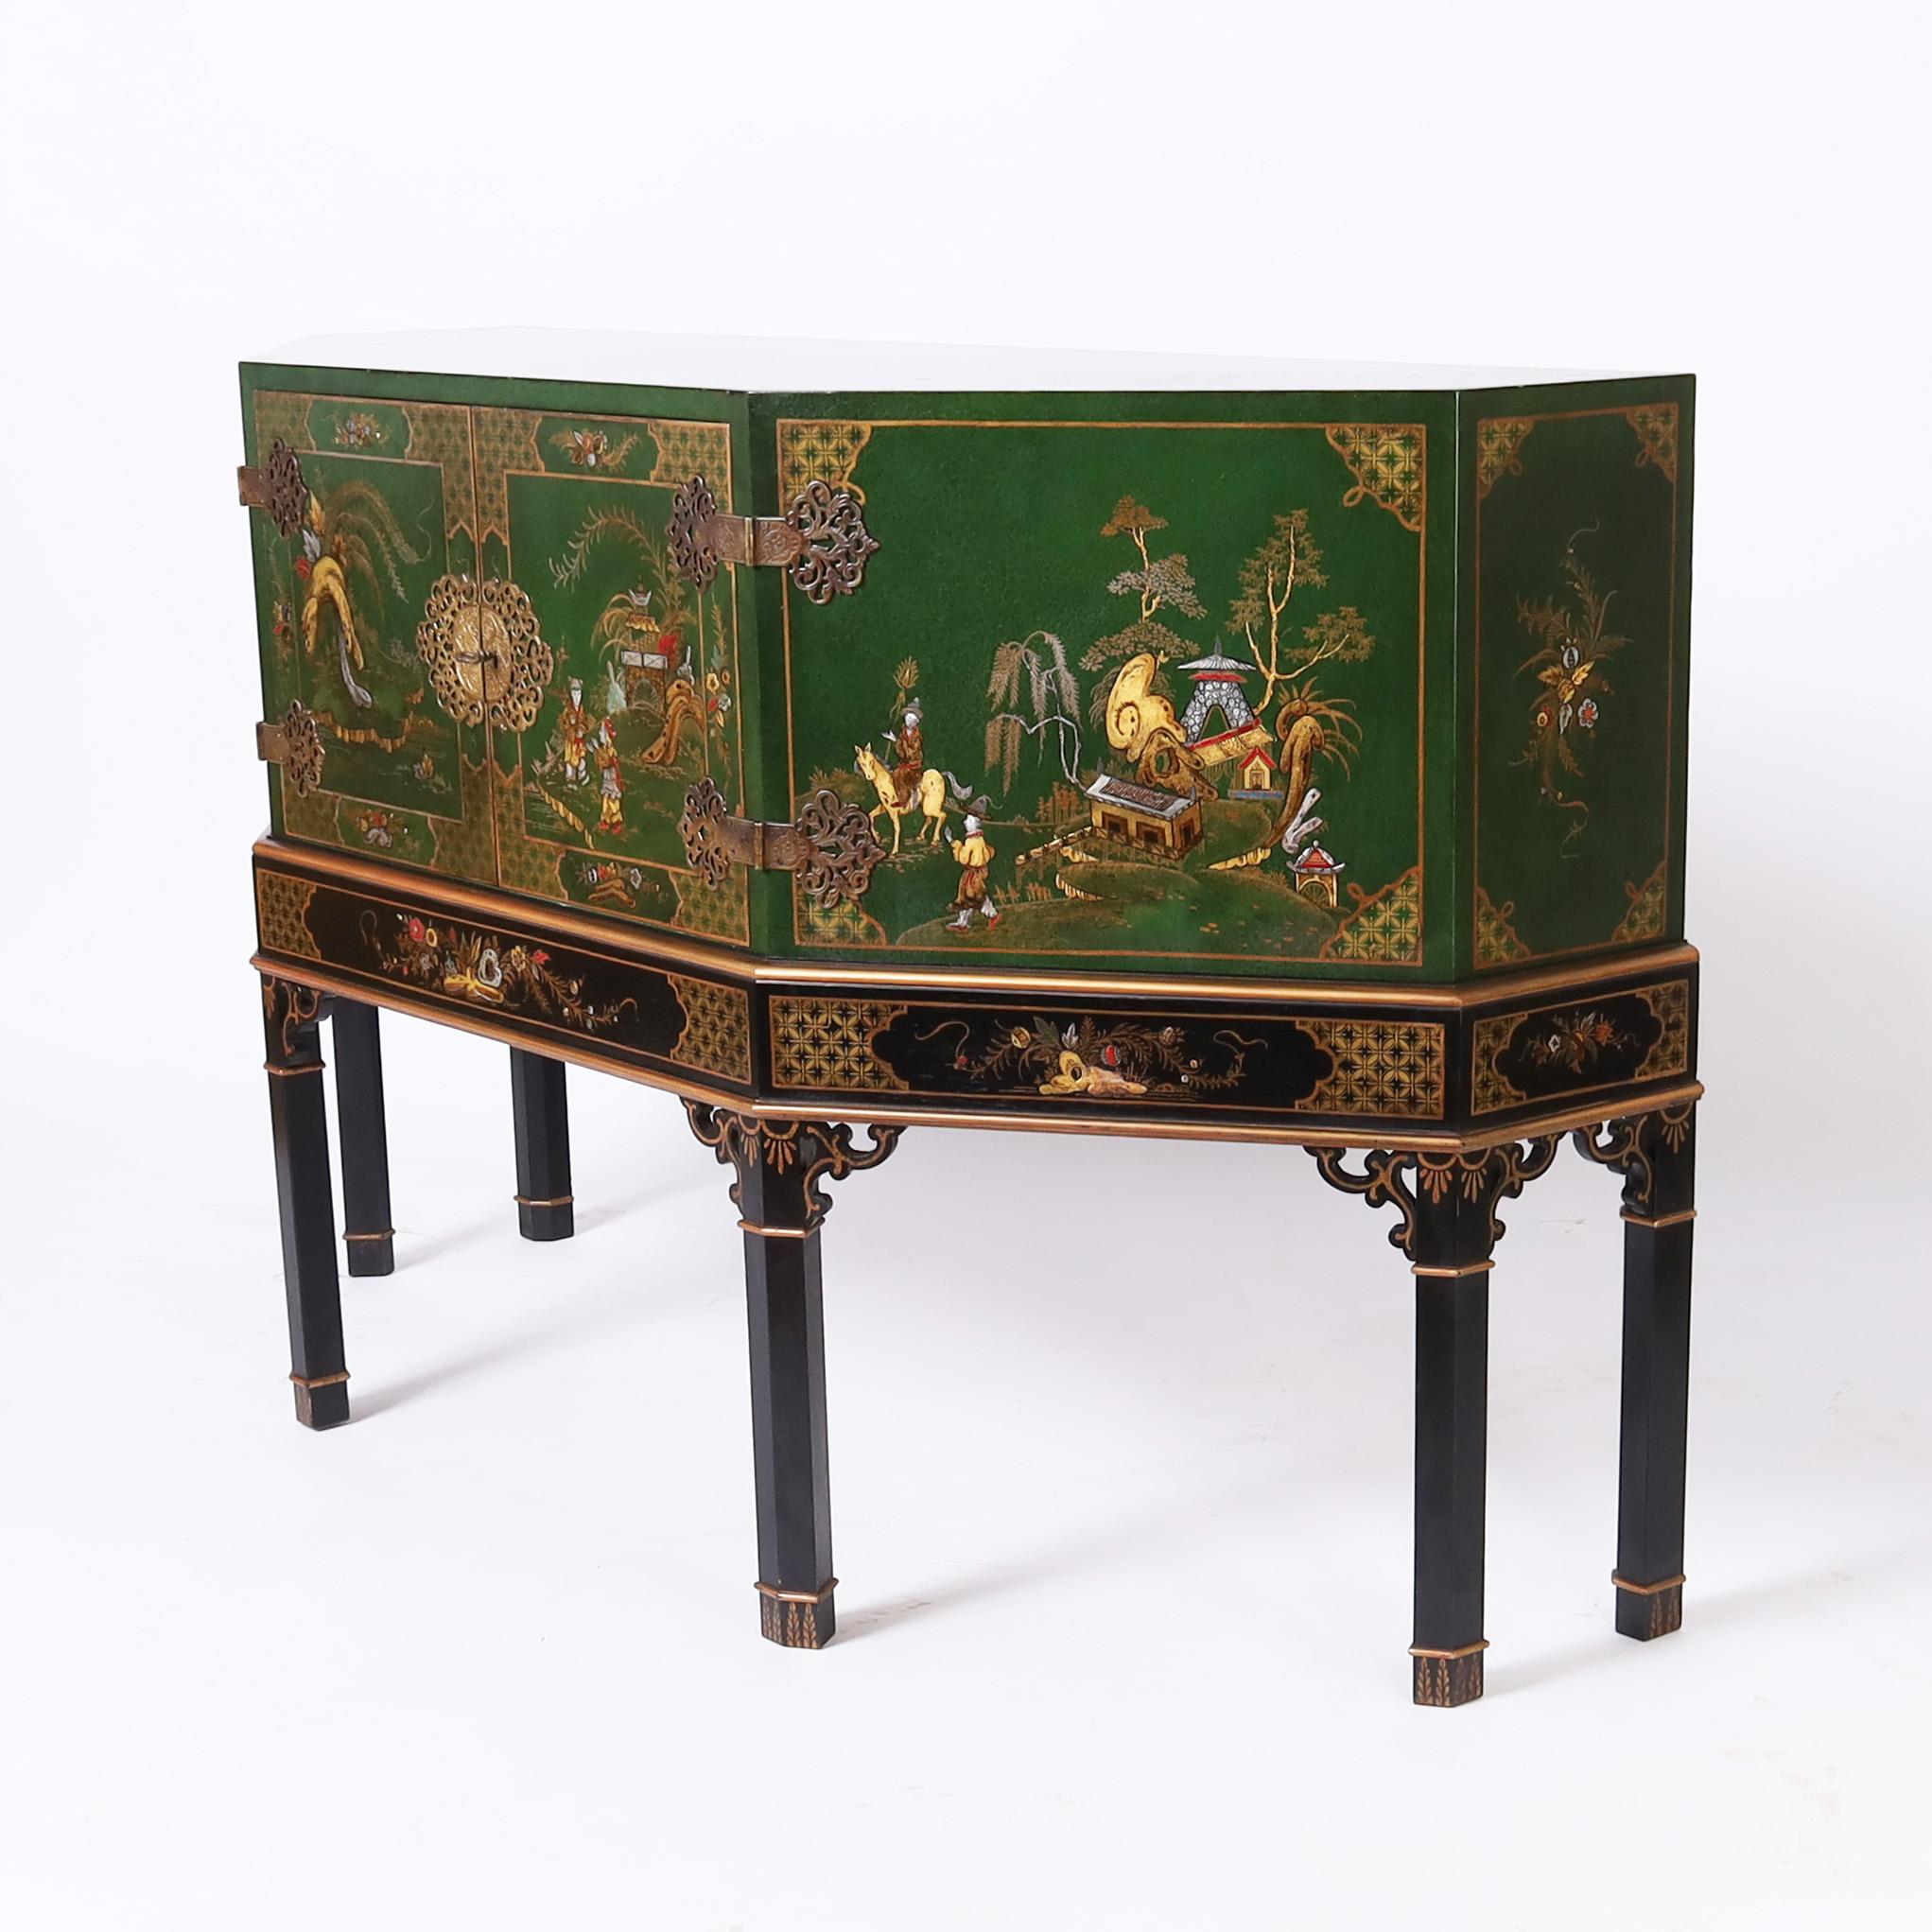 Impressive mid century two door cabinet on stand, lacquered in an alluring green and hand decorated in chinoiserie with elaborate brass hardware on a hand decorated black stand with six ming style legs. 